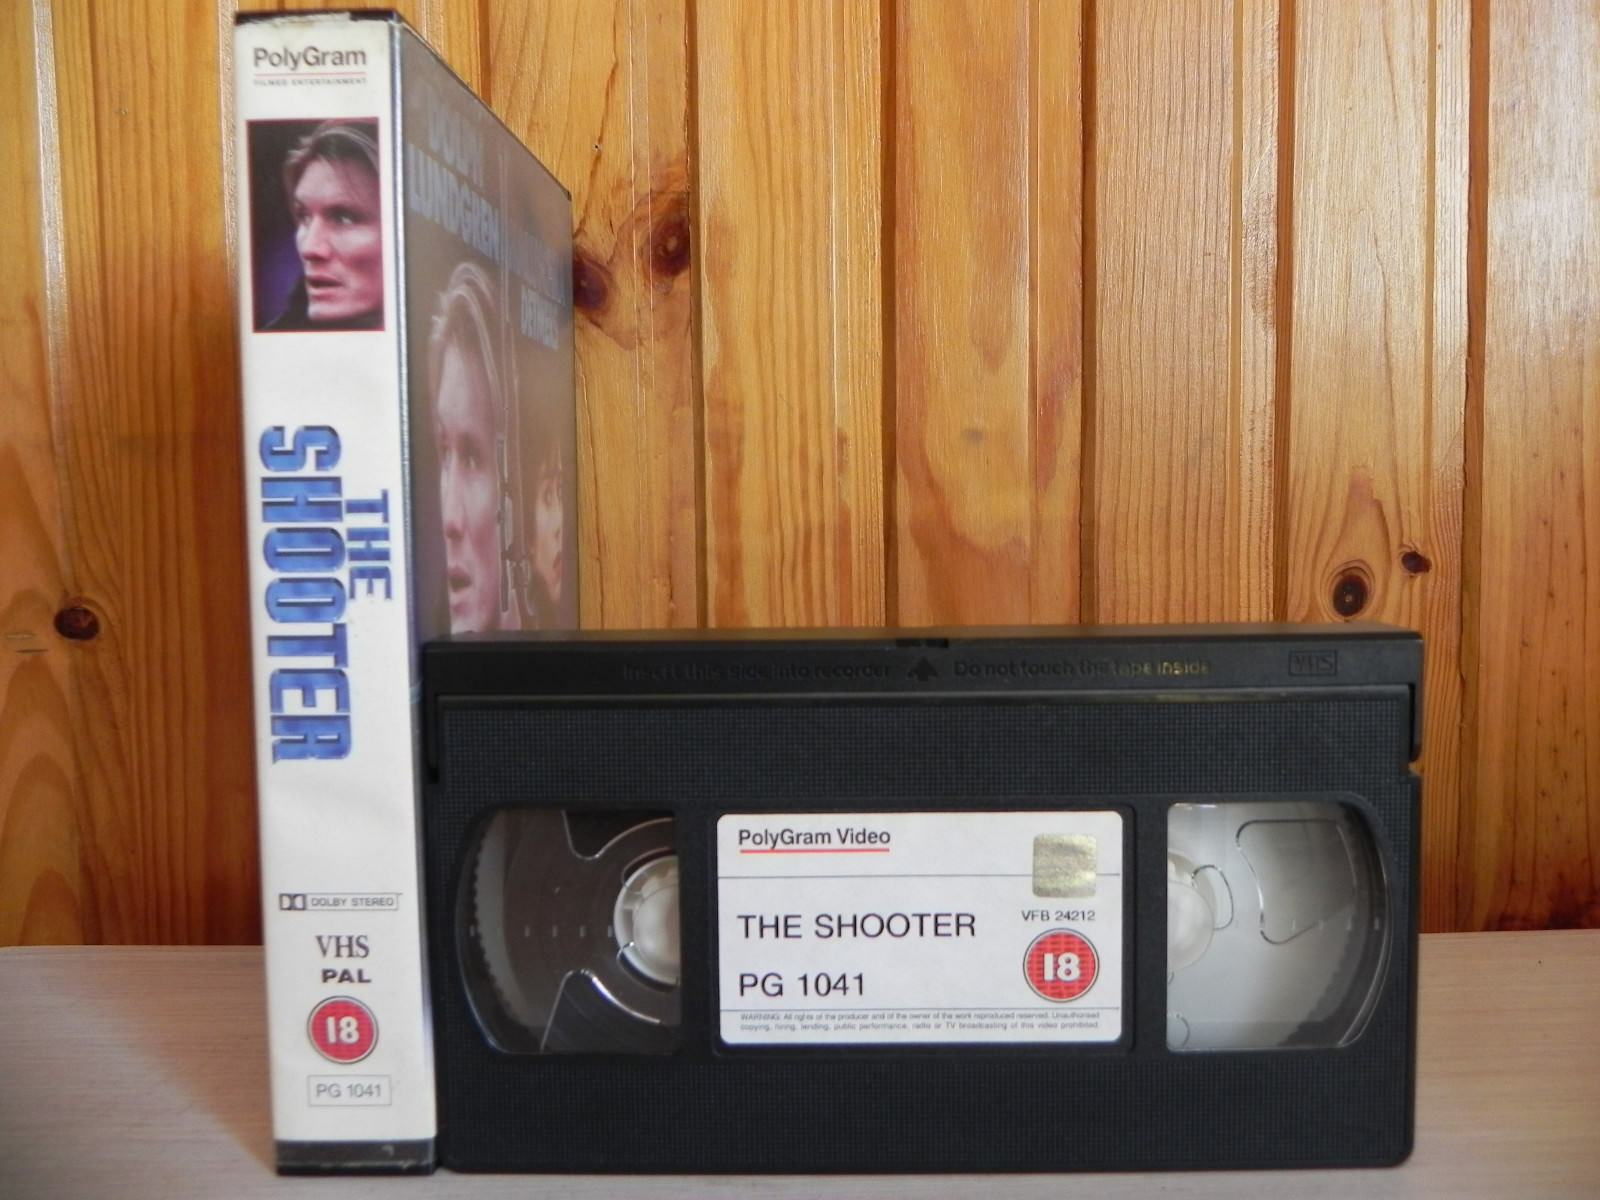 The Shooter - Dolph Lundgren - Full Blooded Action - (18) - Polygram - Pal VHS-